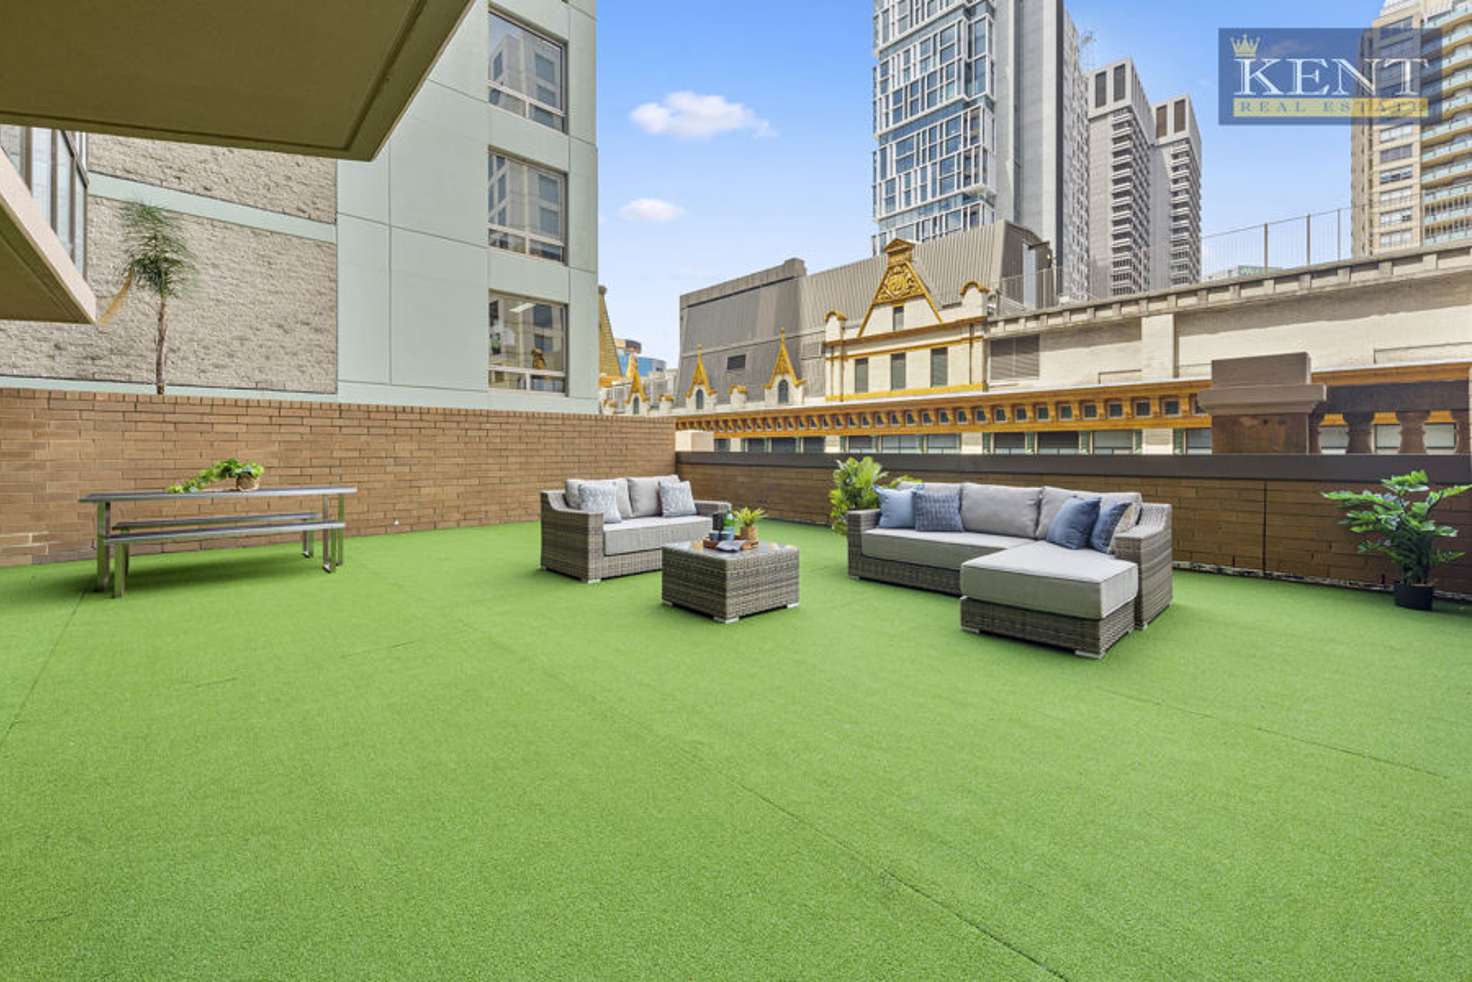 Main view of Homely apartment listing, 2 / 267 Castlereagh St, Sydney NSW 2000